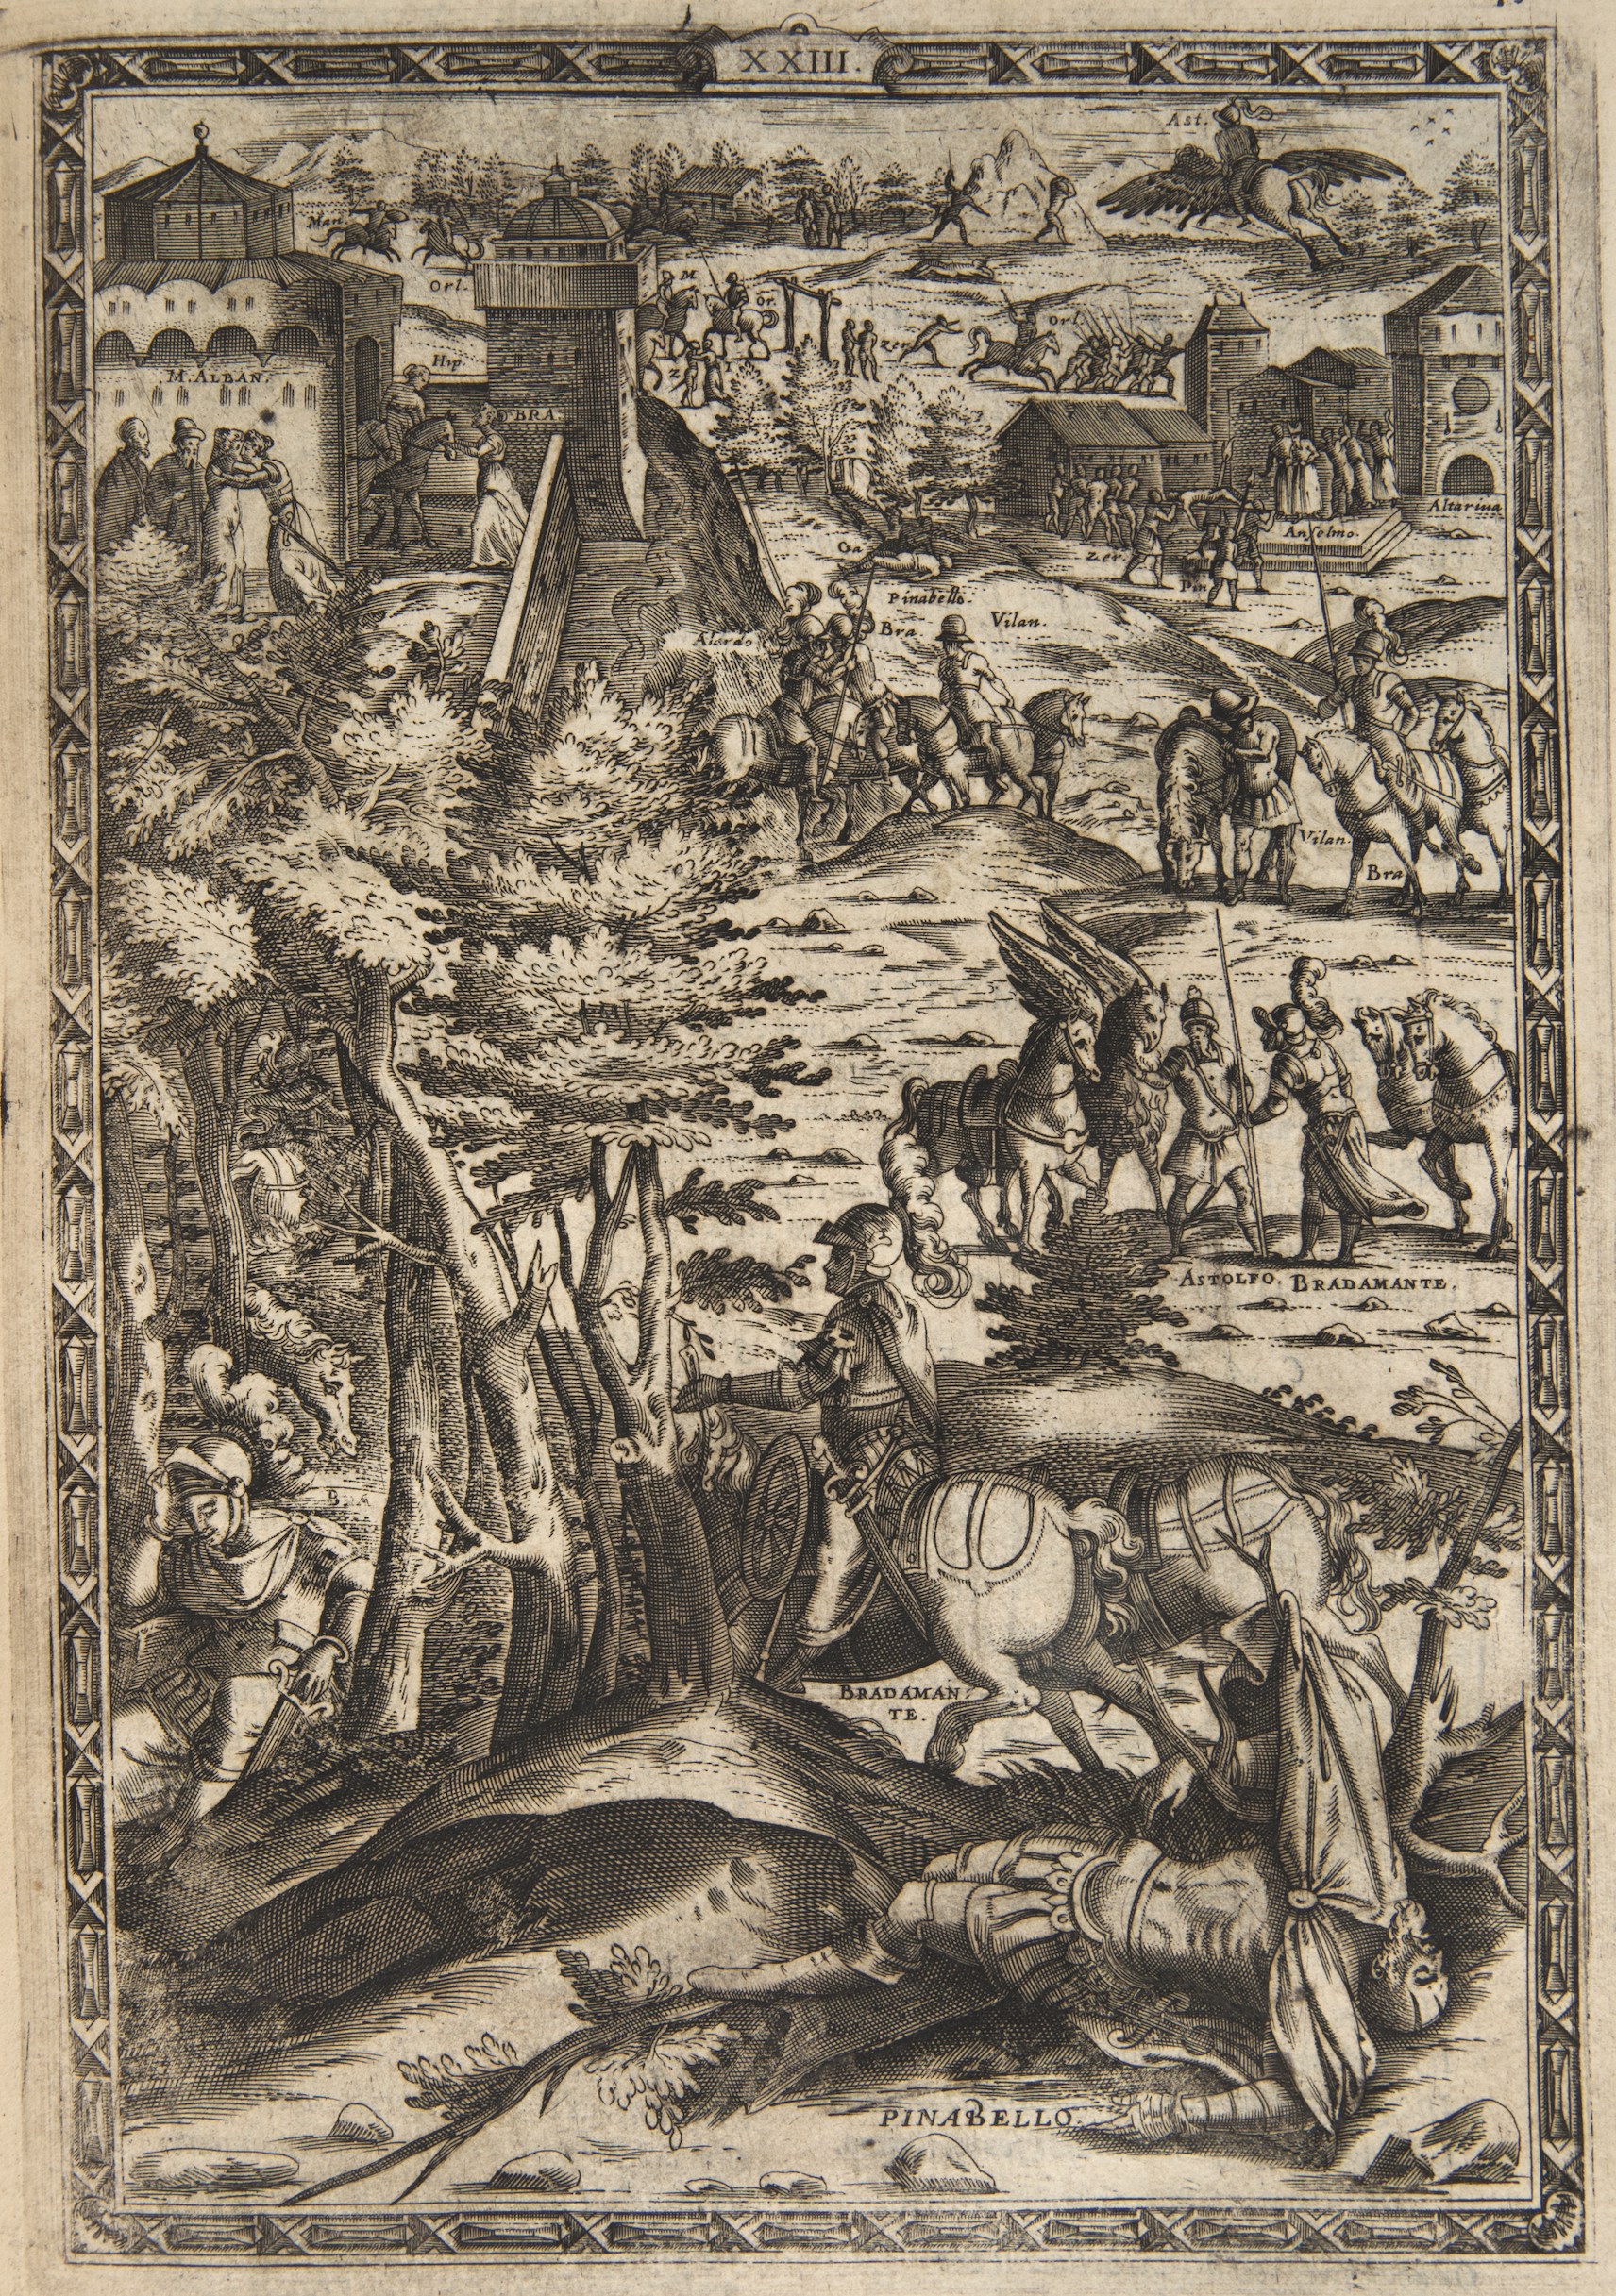 Lithograph knightly figures scattered through a landscape, showing various scenes from the epic.